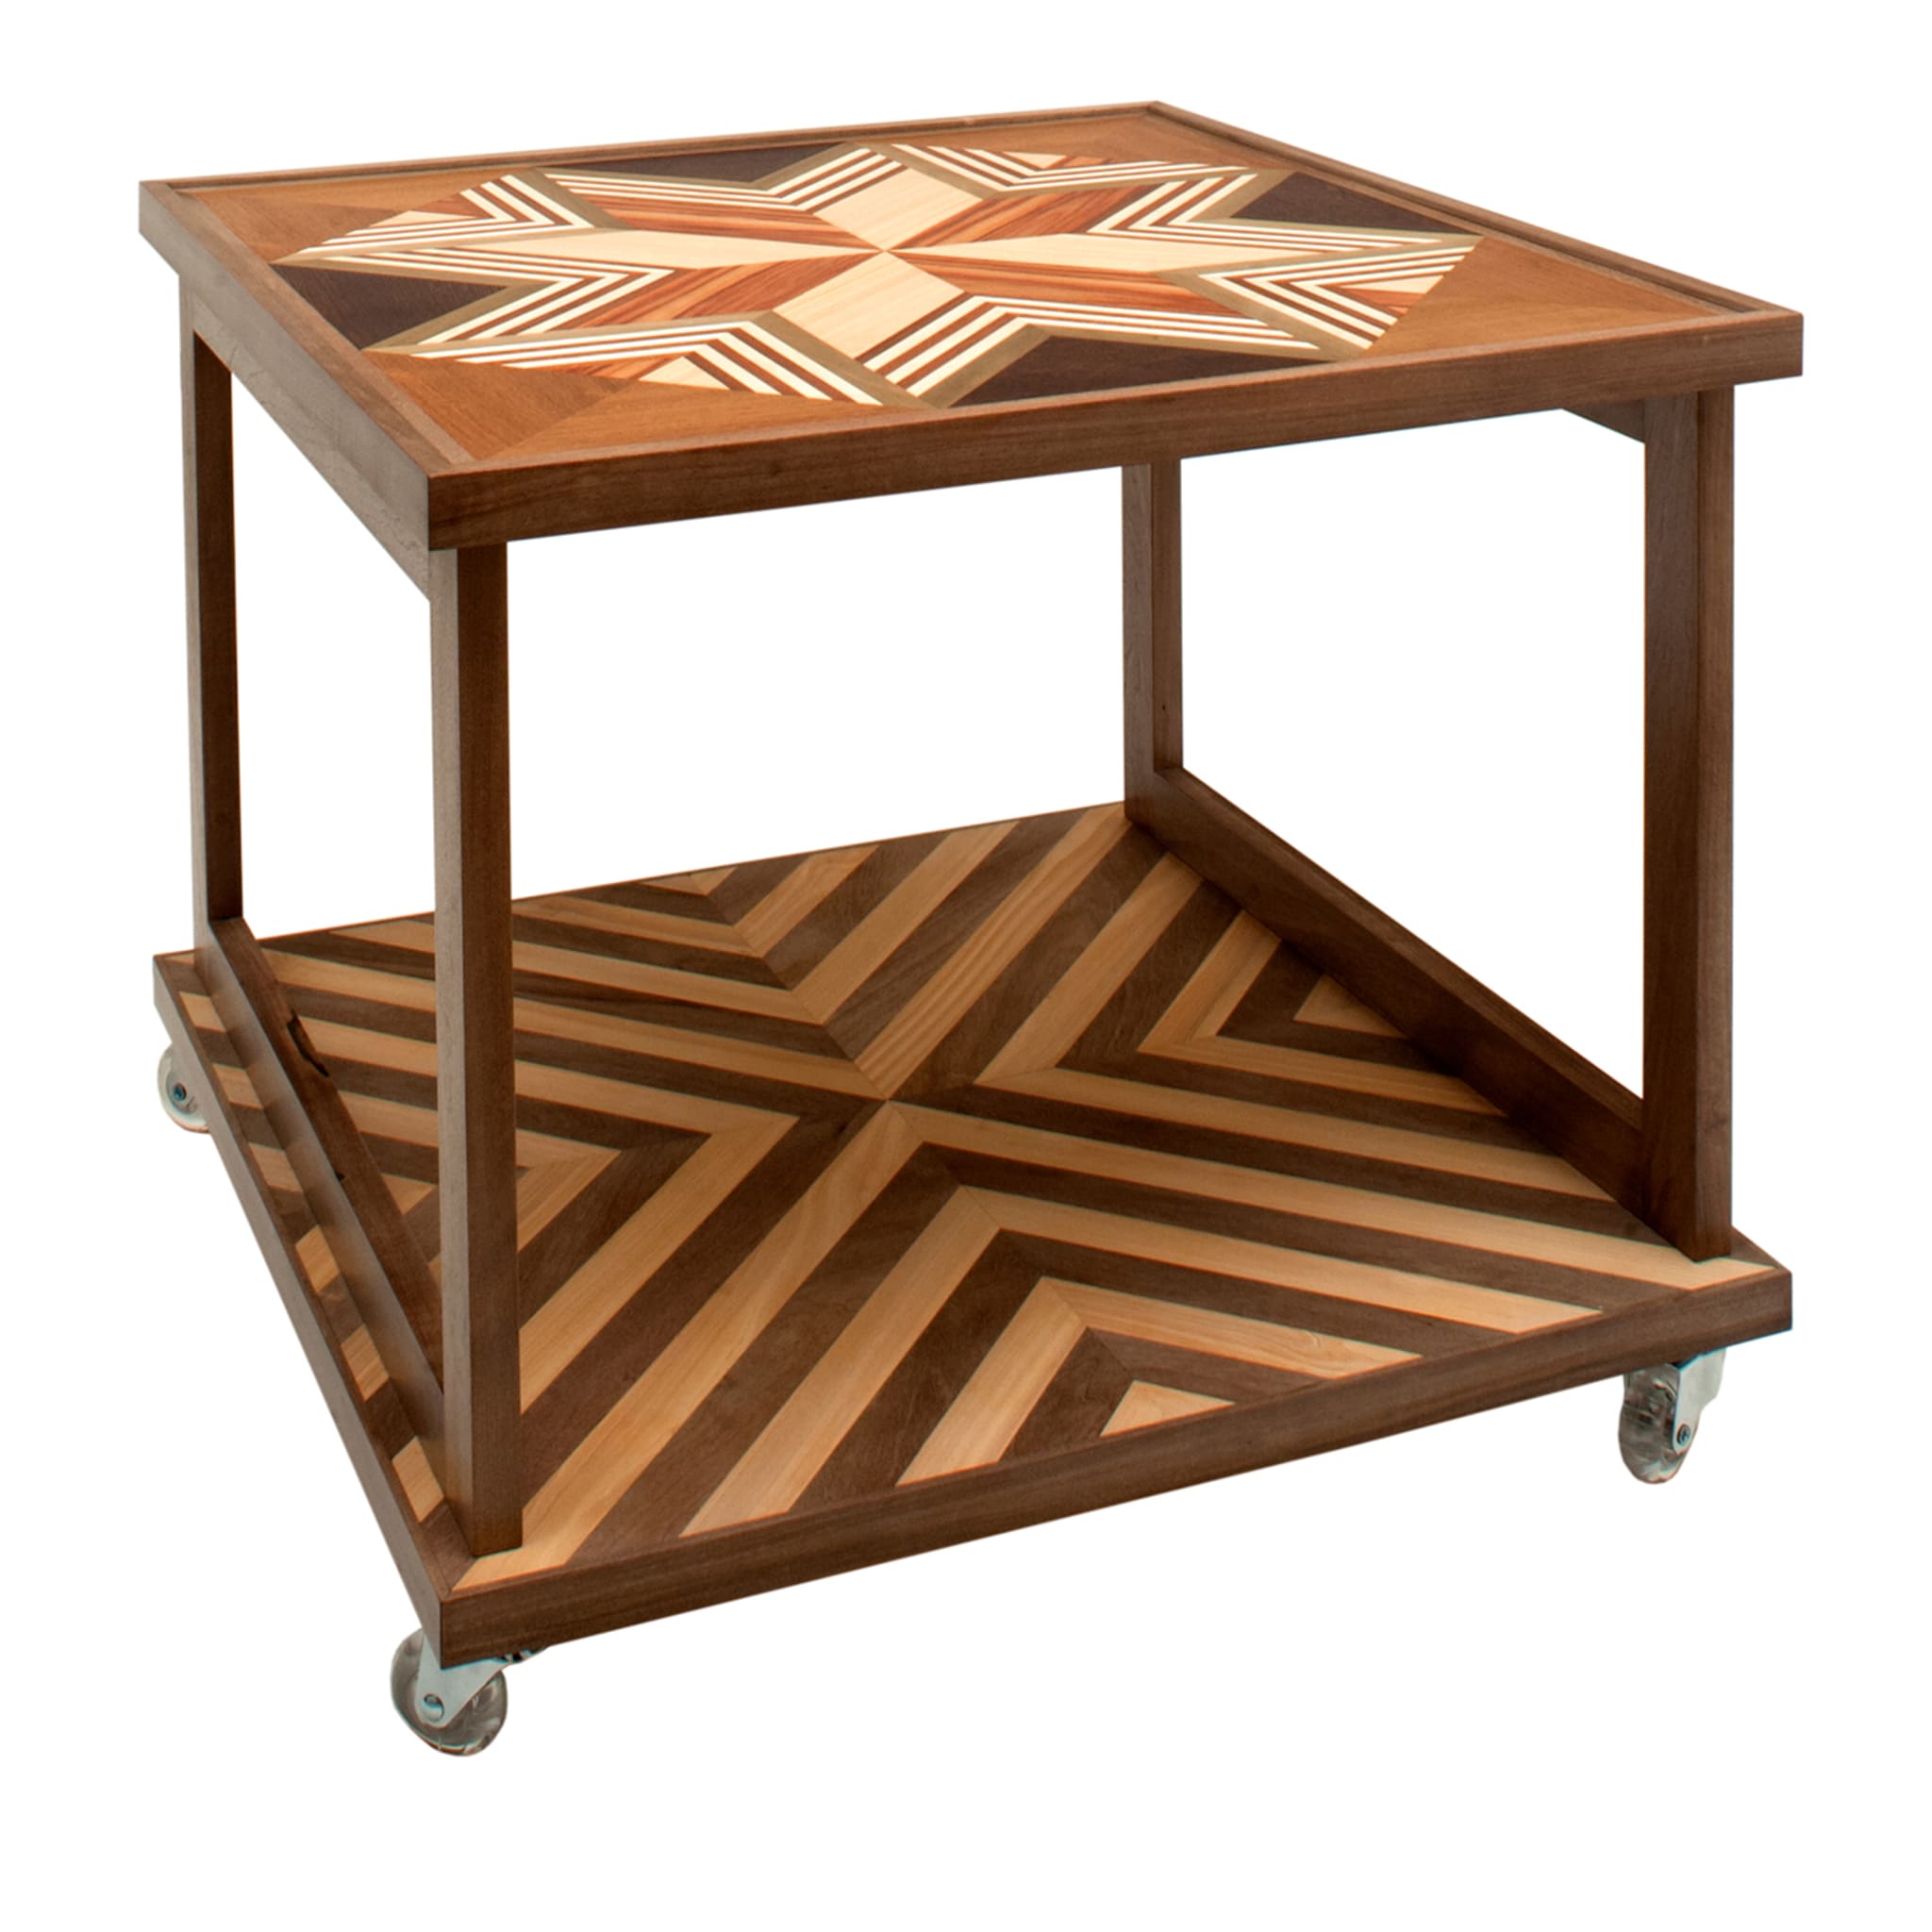 Renaissance-Style Marquetry Wheeled Coffee Table #1 - Main view